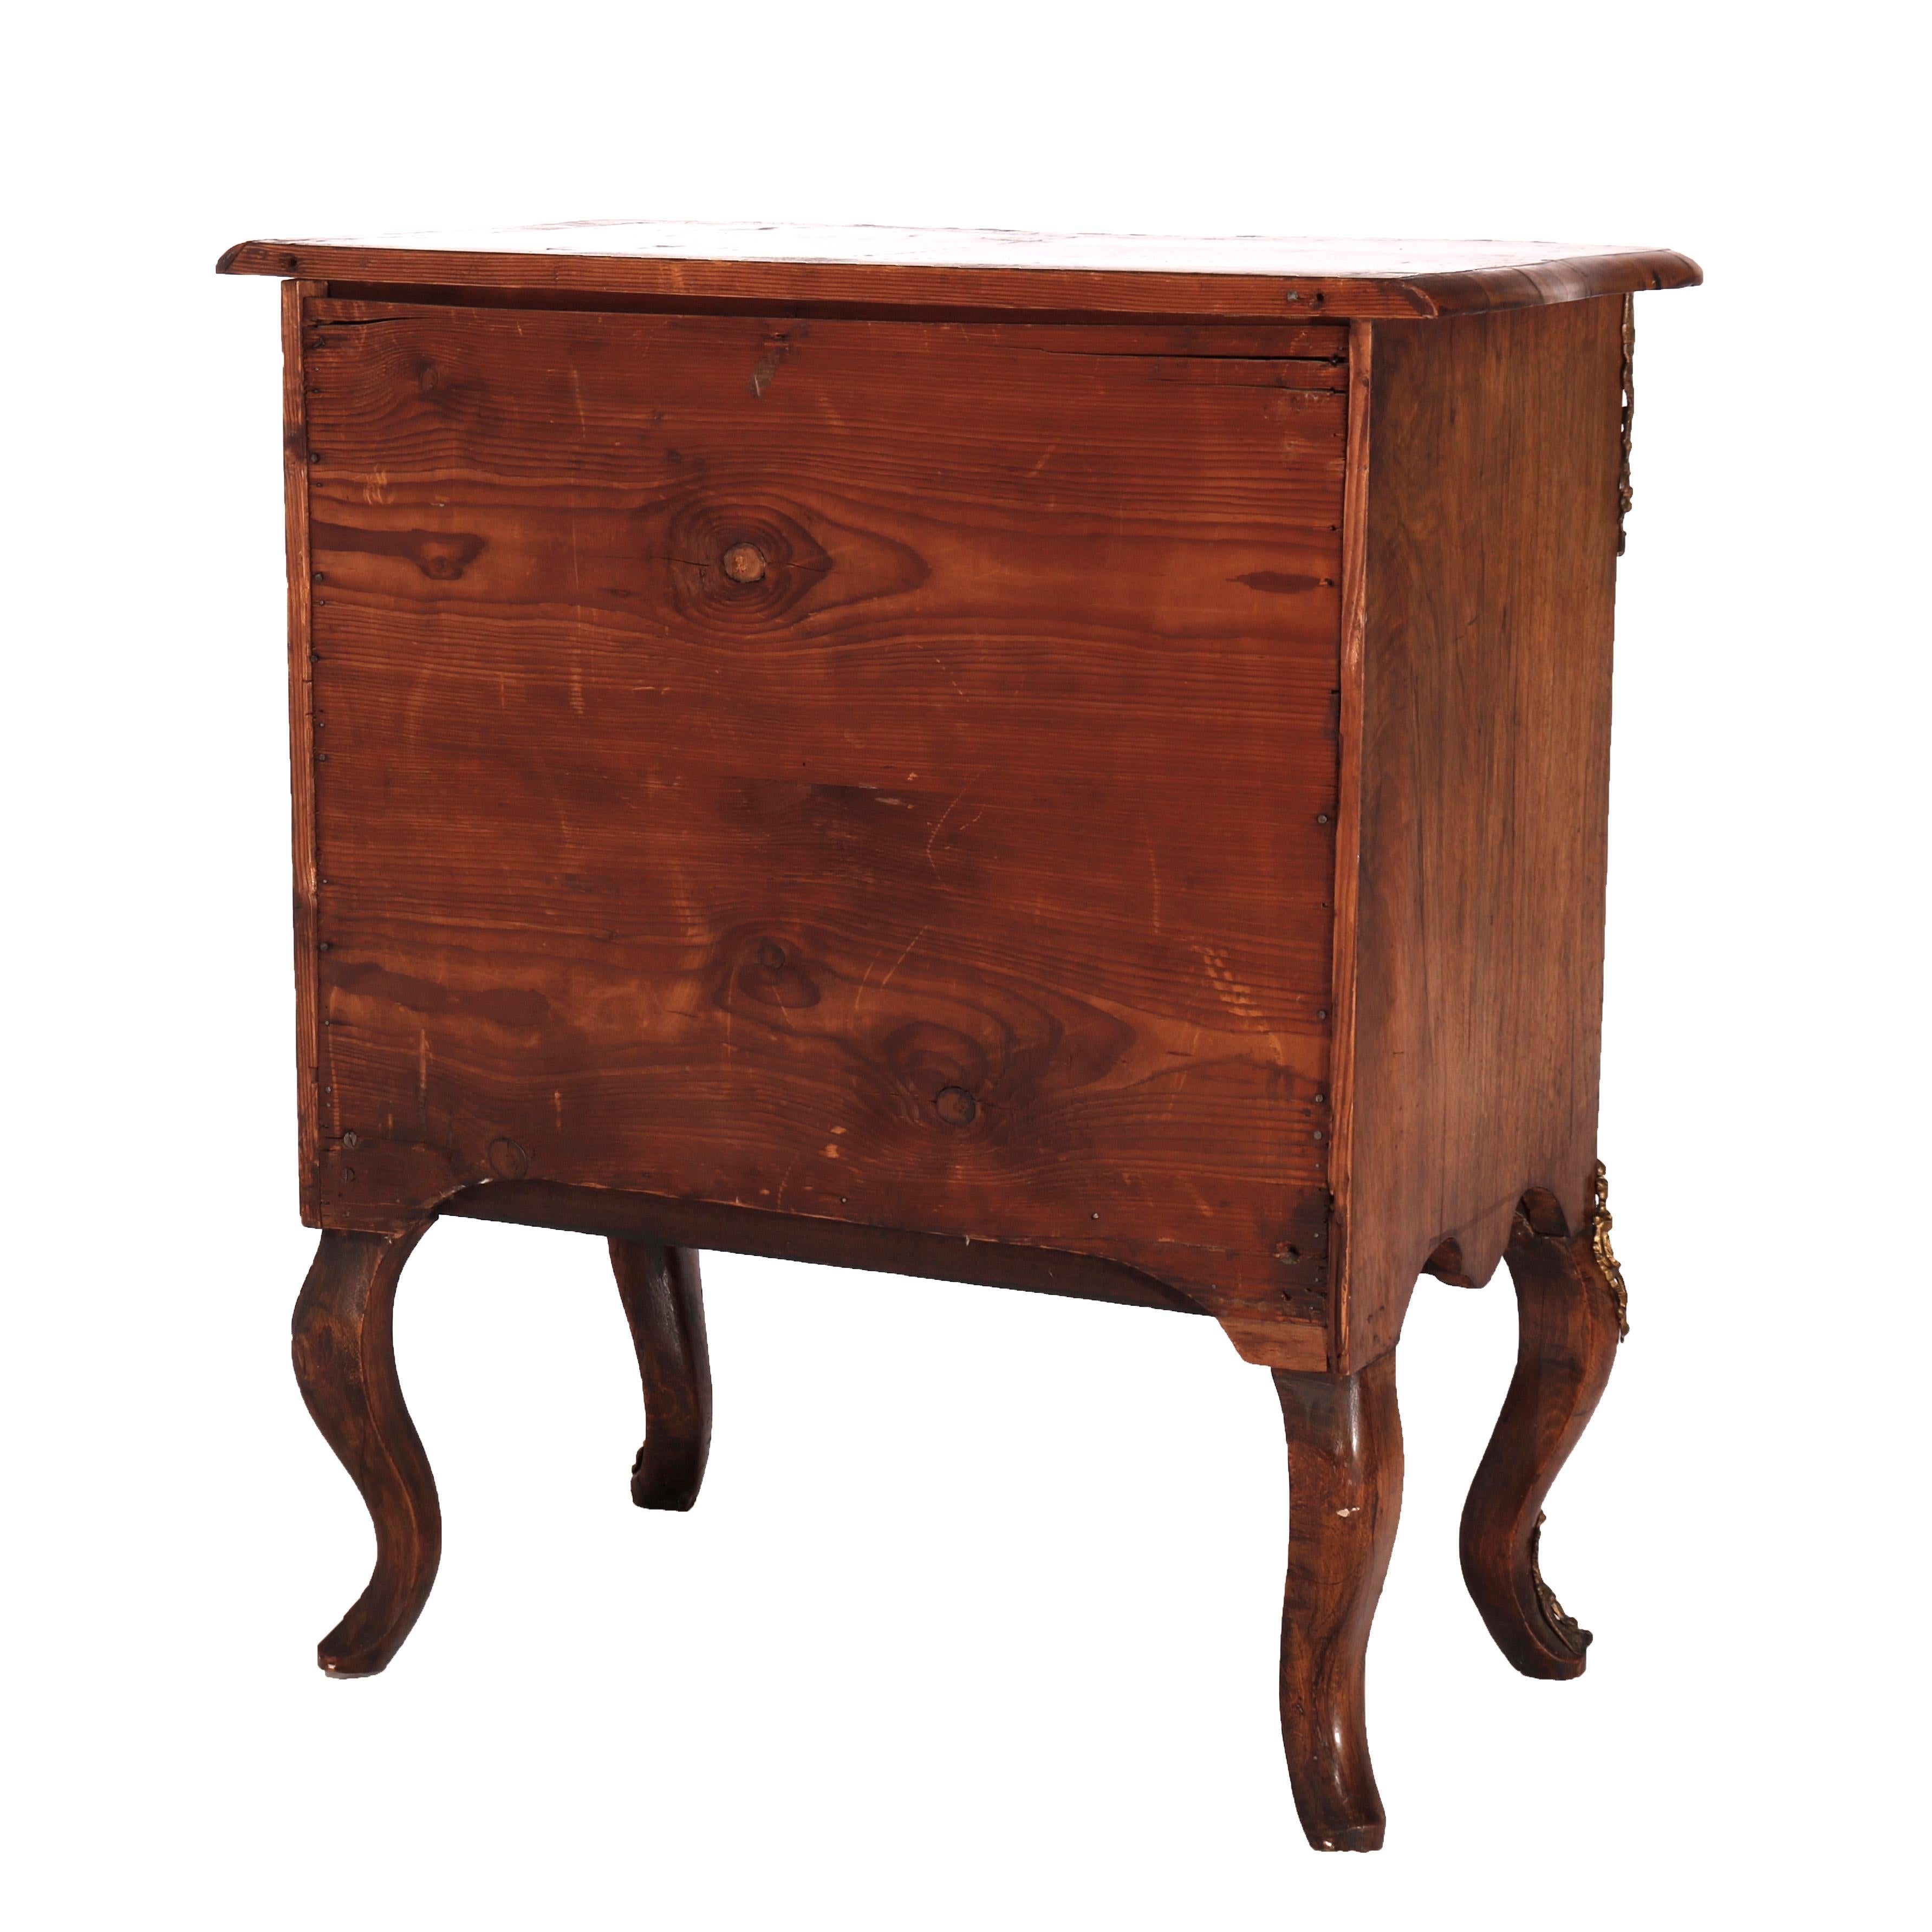  Antique Italian Kingwood, Satinwood & Burl Chest with Ormolu Mounts Late 18th C For Sale 4